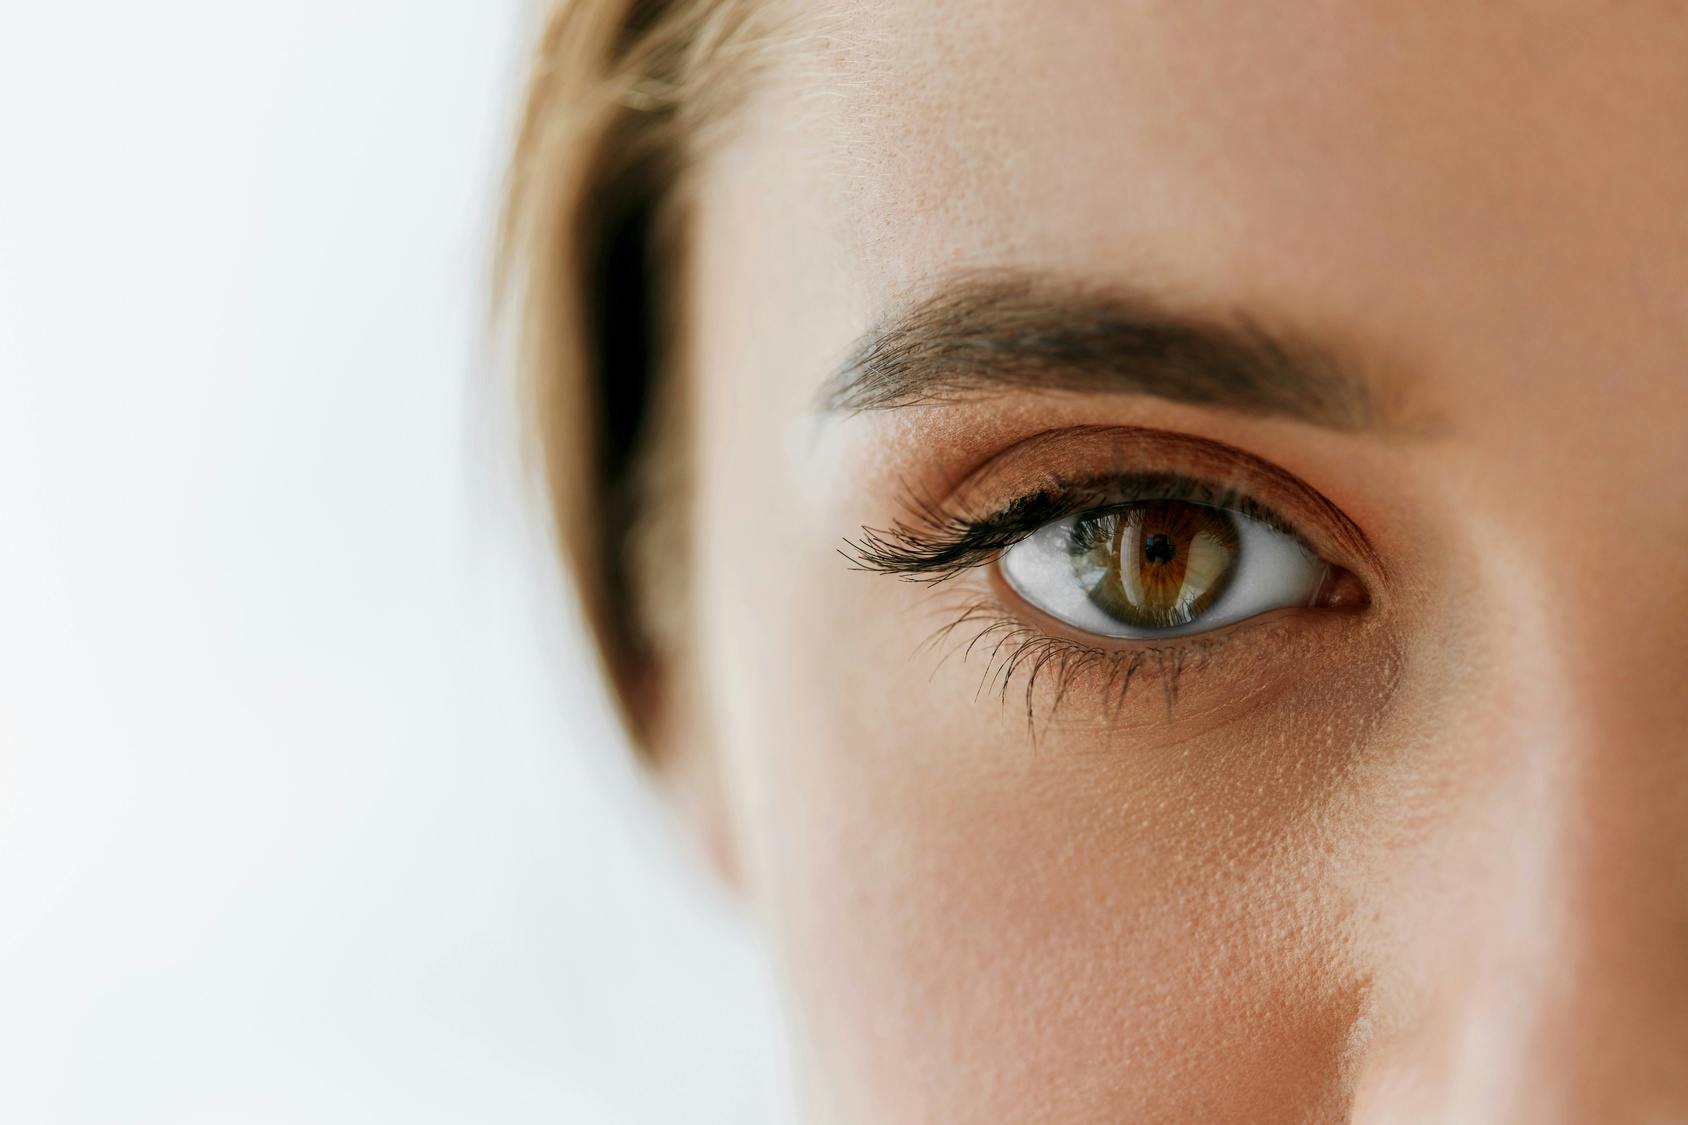 How Chiropractic can help with eye health